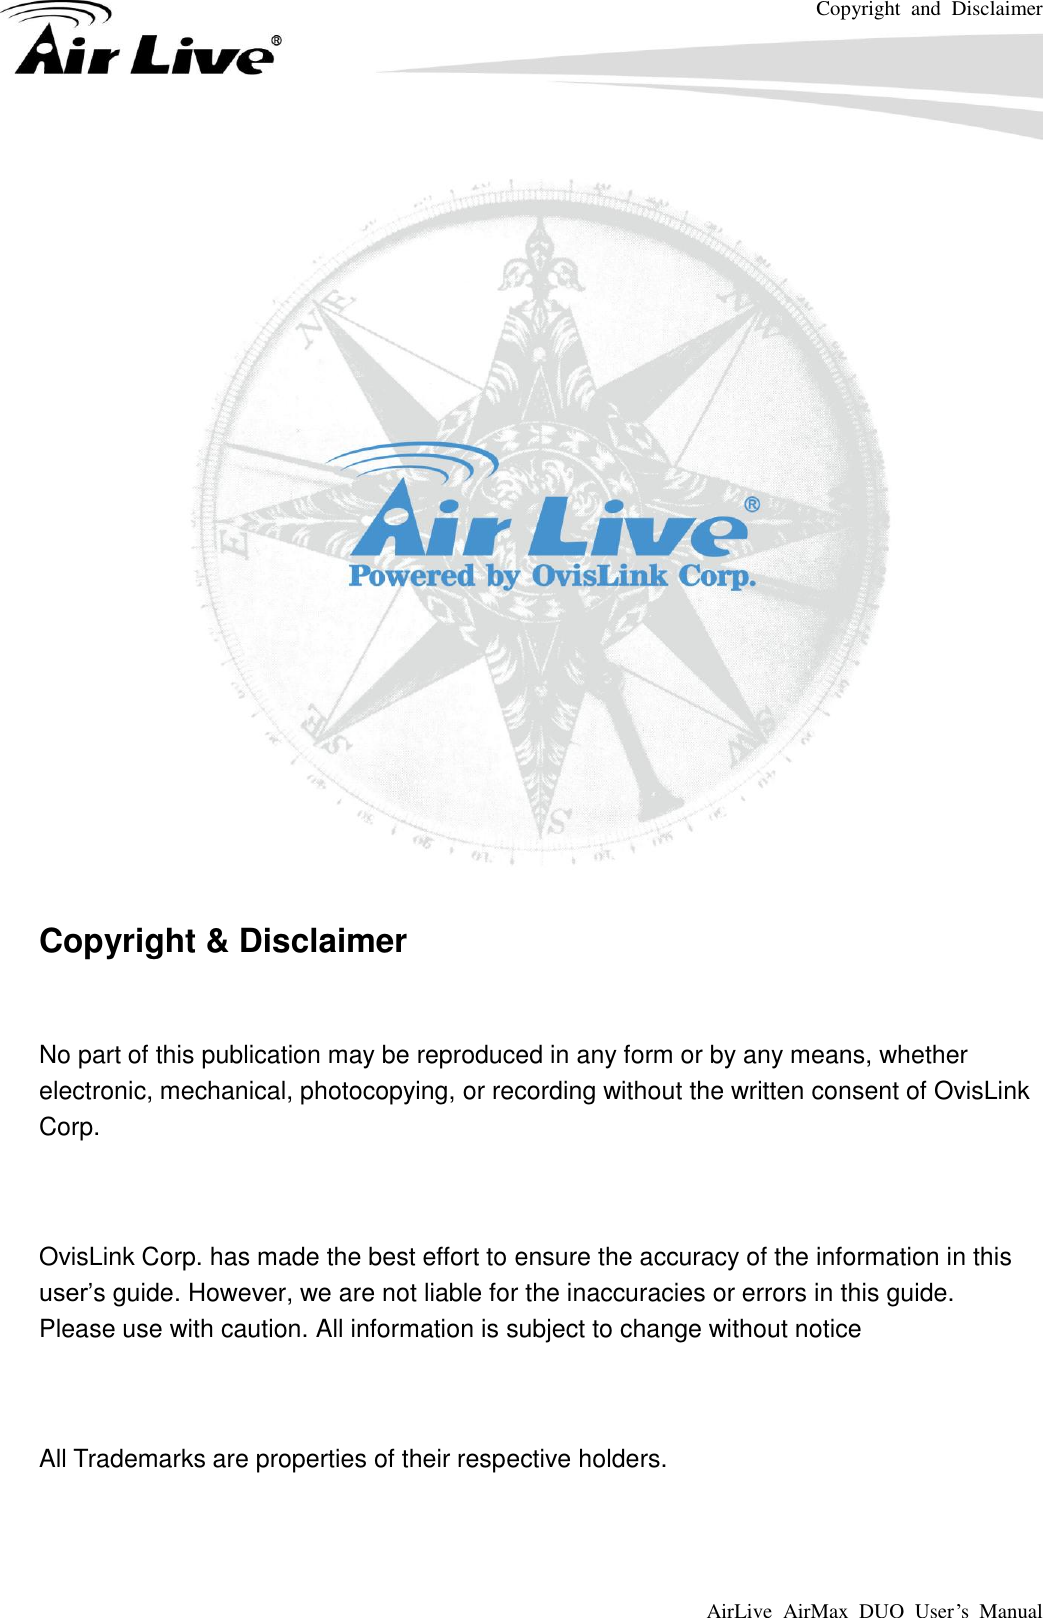 Copyright  and  Disclaimer AirLive  AirMax  DUO  User’s  Manual      Copyright &amp; Disclaimer  No part of this publication may be reproduced in any form or by any means, whether electronic, mechanical, photocopying, or recording without the written consent of OvisLink Corp.  OvisLink Corp. has made the best effort to ensure the accuracy of the information in this user’s guide. However, we are not liable for the inaccuracies or errors in this guide.   Please use with caution. All information is subject to change without notice  All Trademarks are properties of their respective holders.  